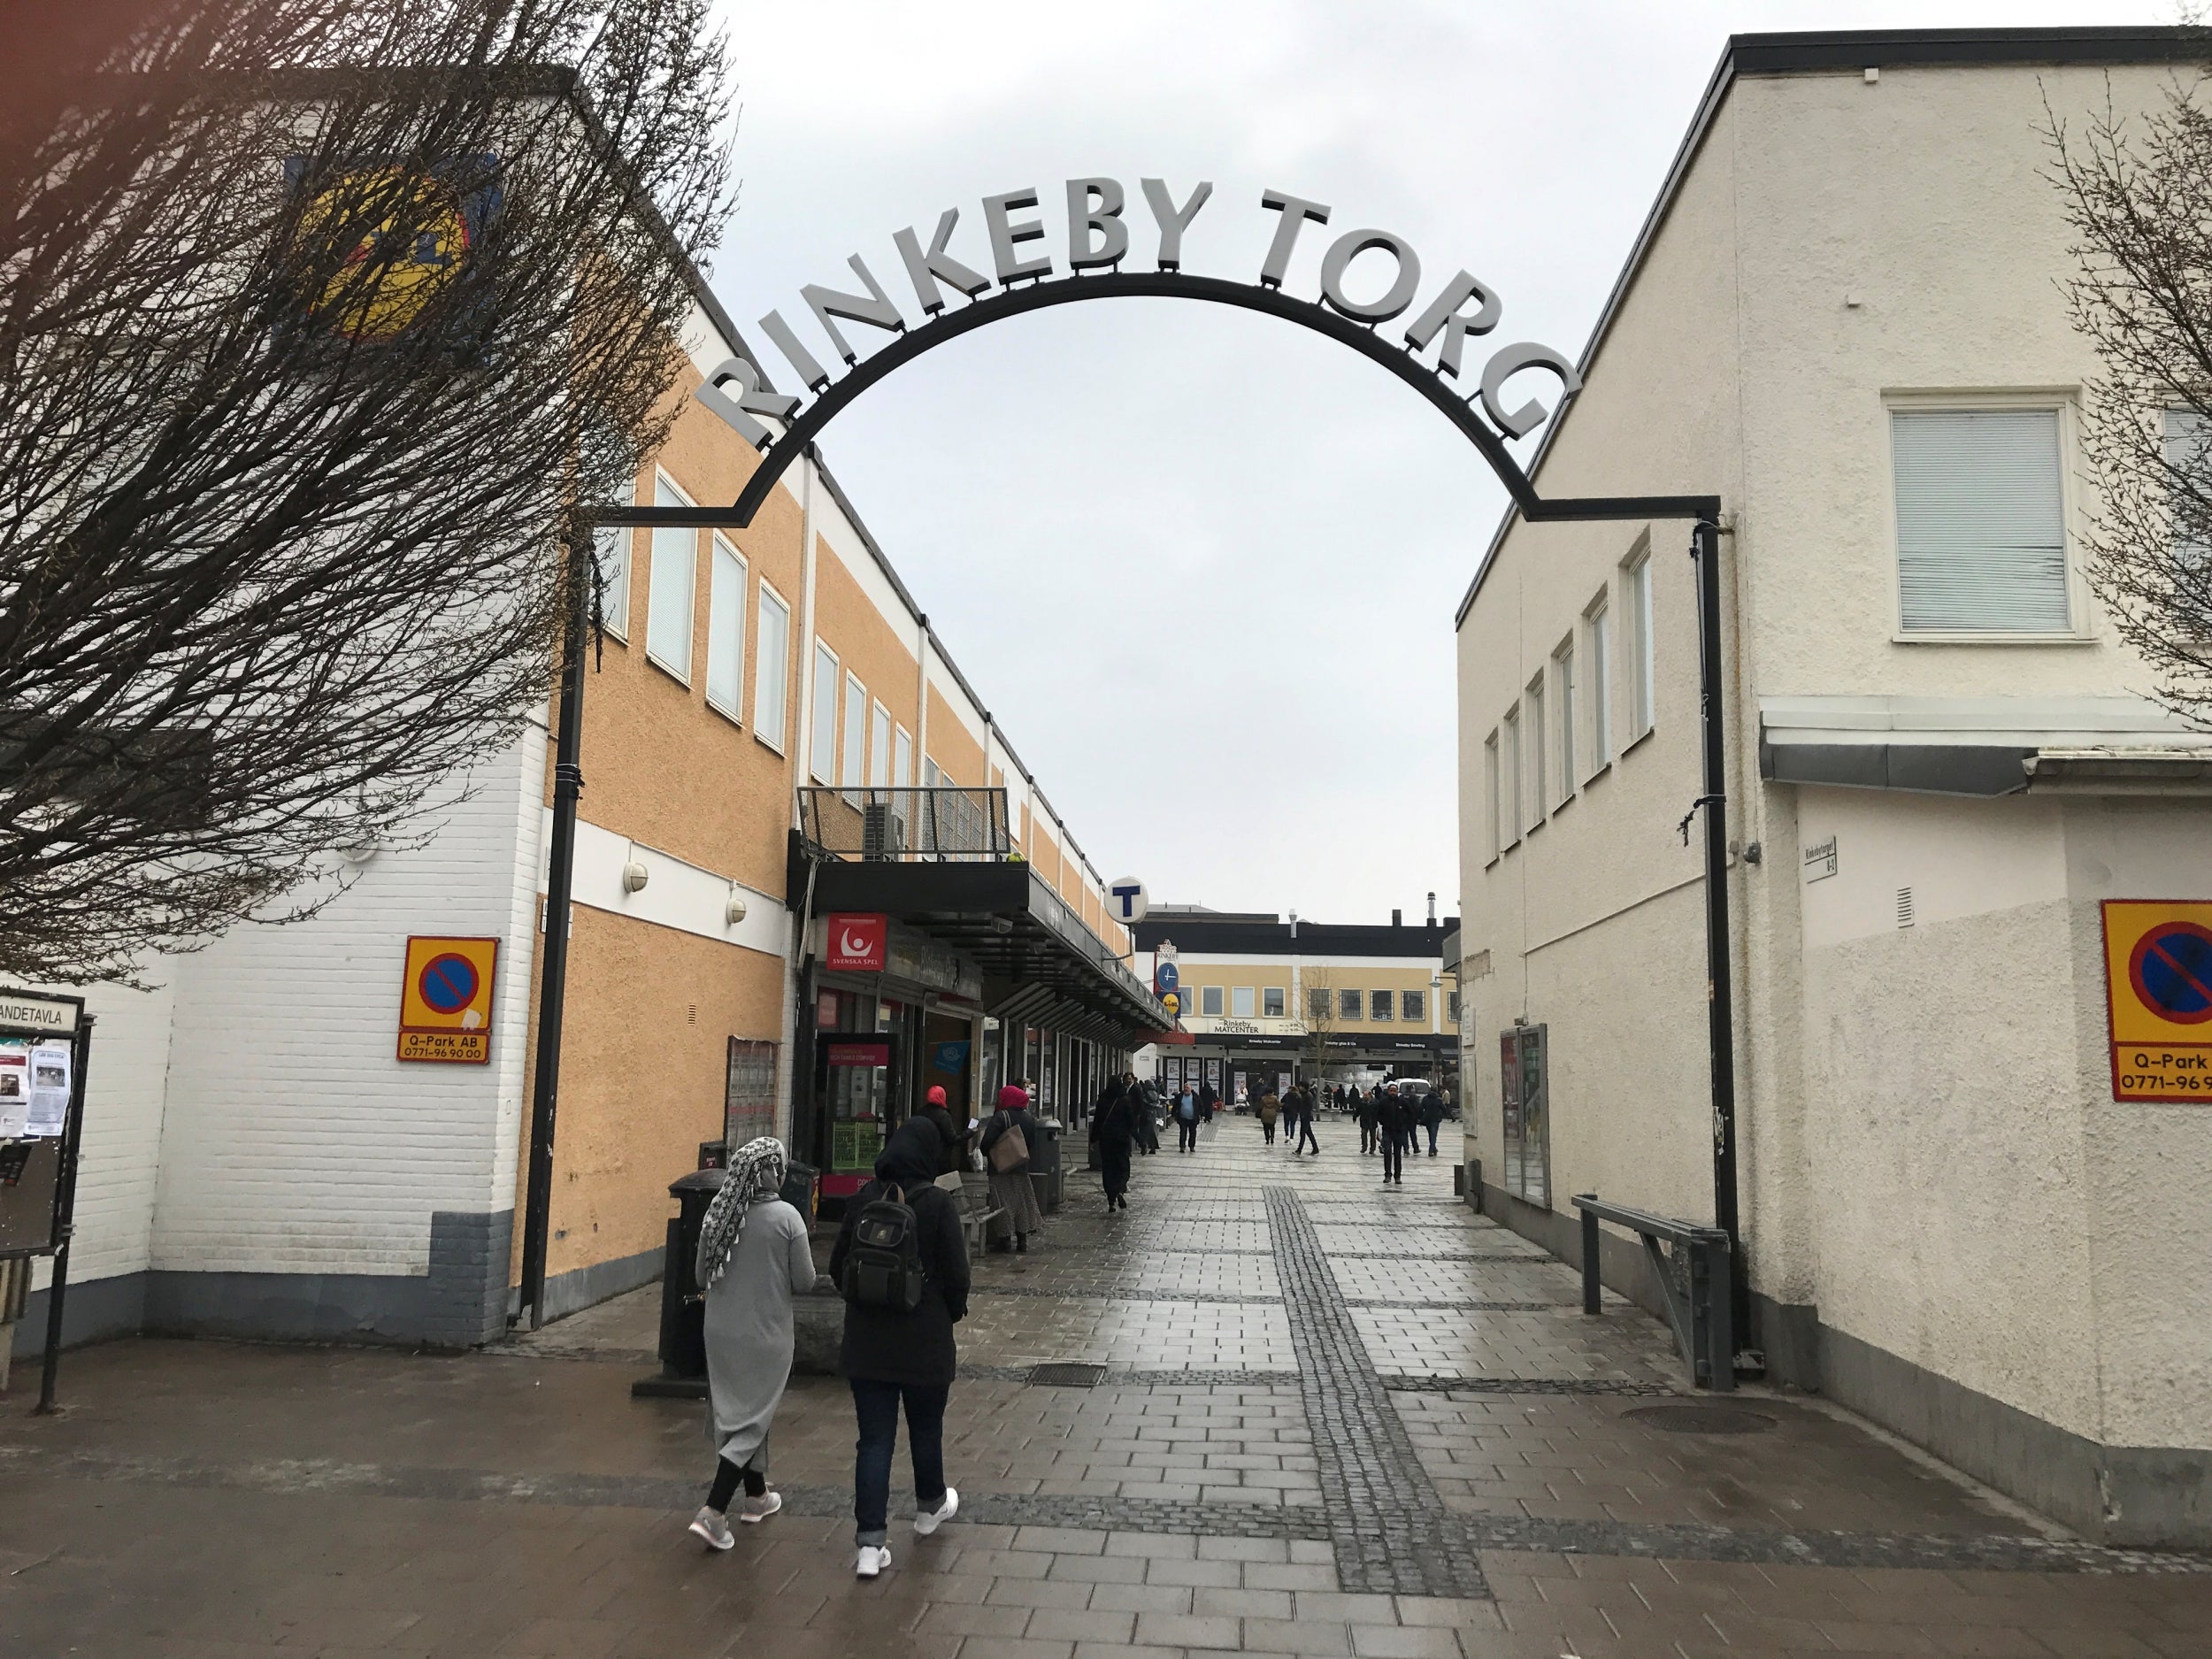 &#13;
More than 91 percent of Rinkeby’s roughly 16,400 residents are immigrants and their children. &#13;